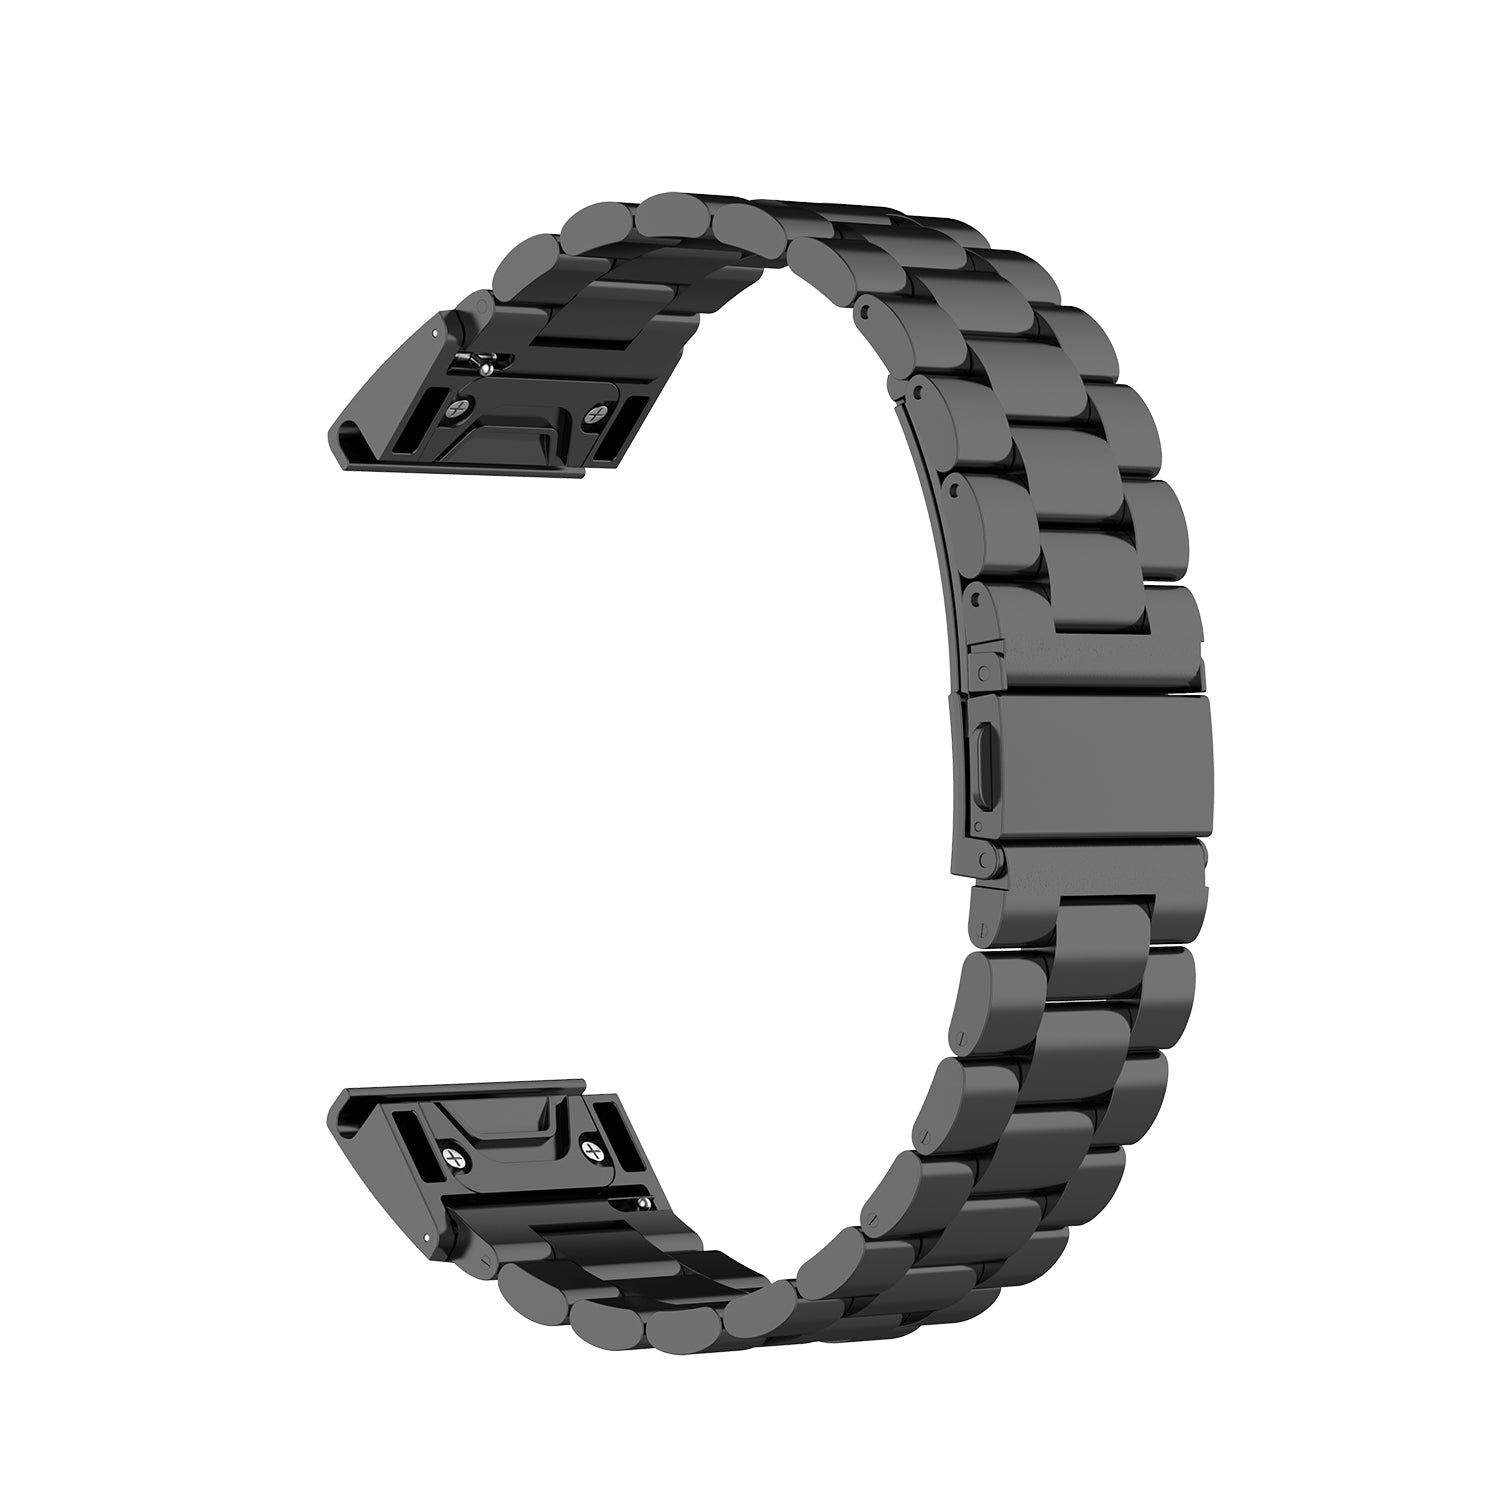 20mm Three Beads Watch Band Replacement Stainless Steel Watch Strap for Garmin Fenix 6S - Black